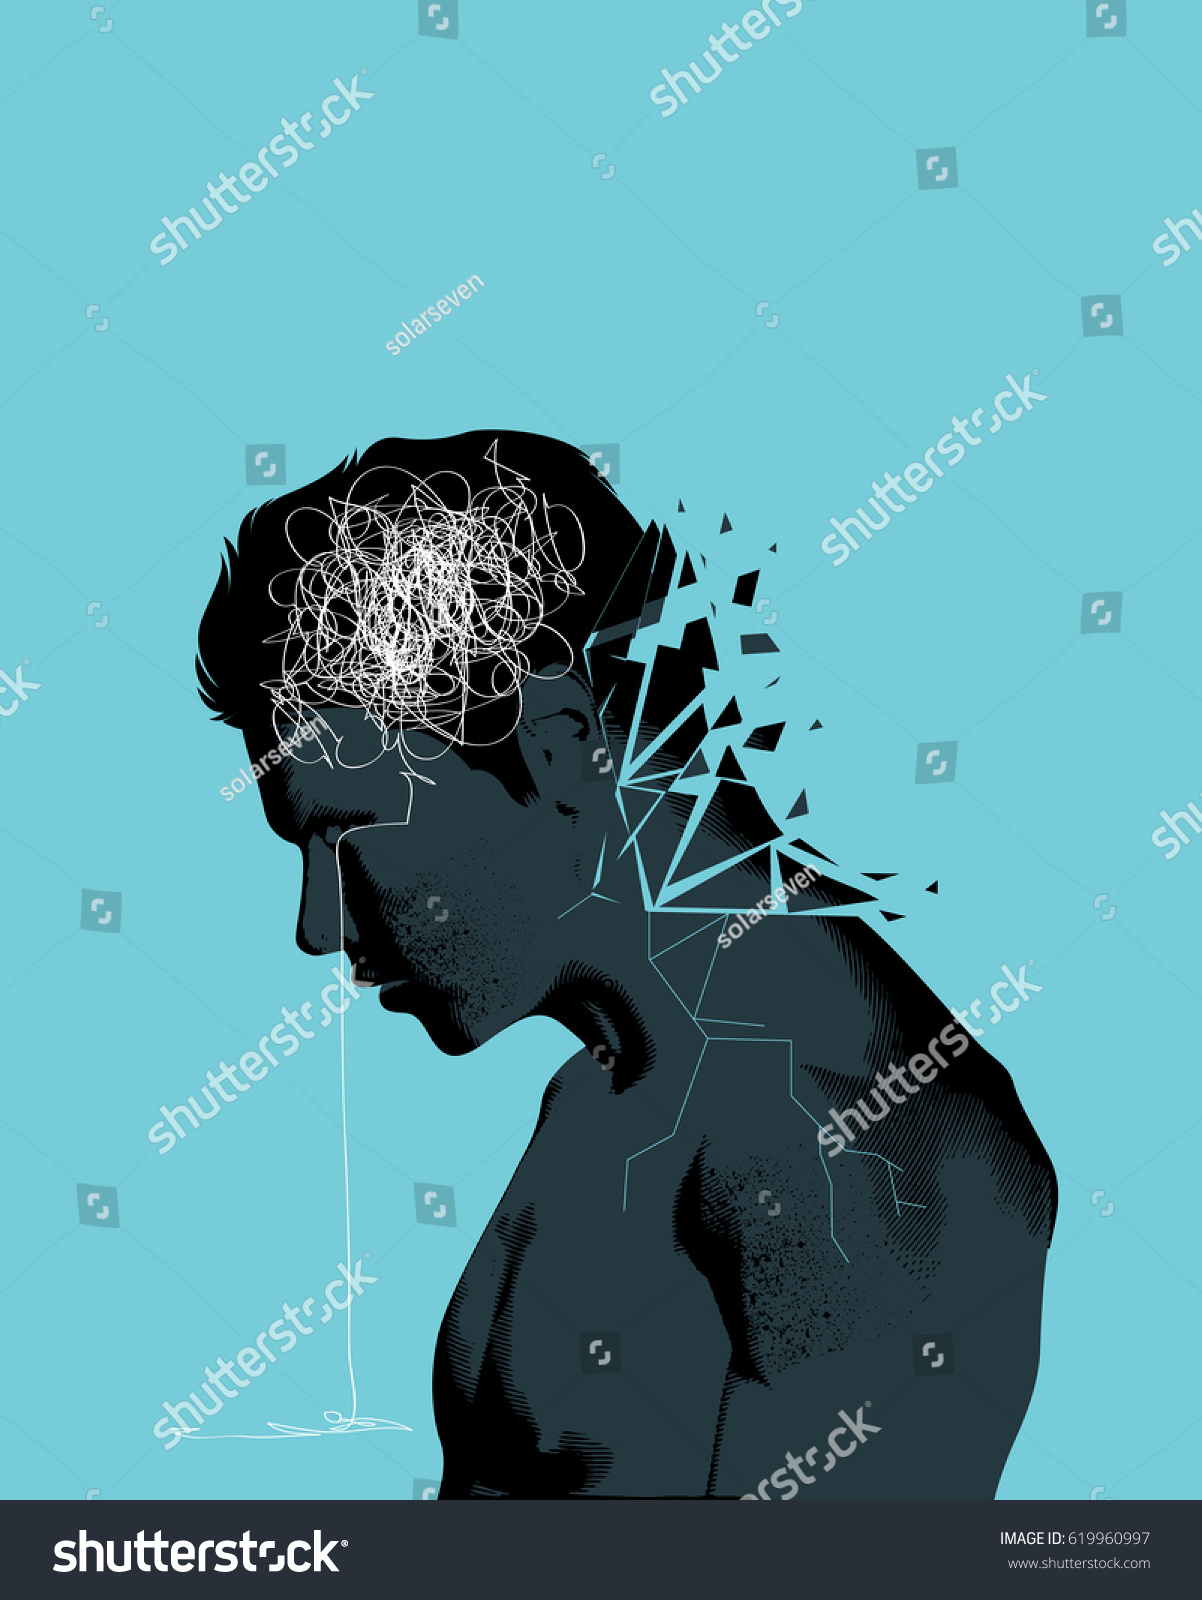 SVG of A man with his head lowered shattering showing mental health issues. Anxiety, depression and mindfulness awareness concept. svg